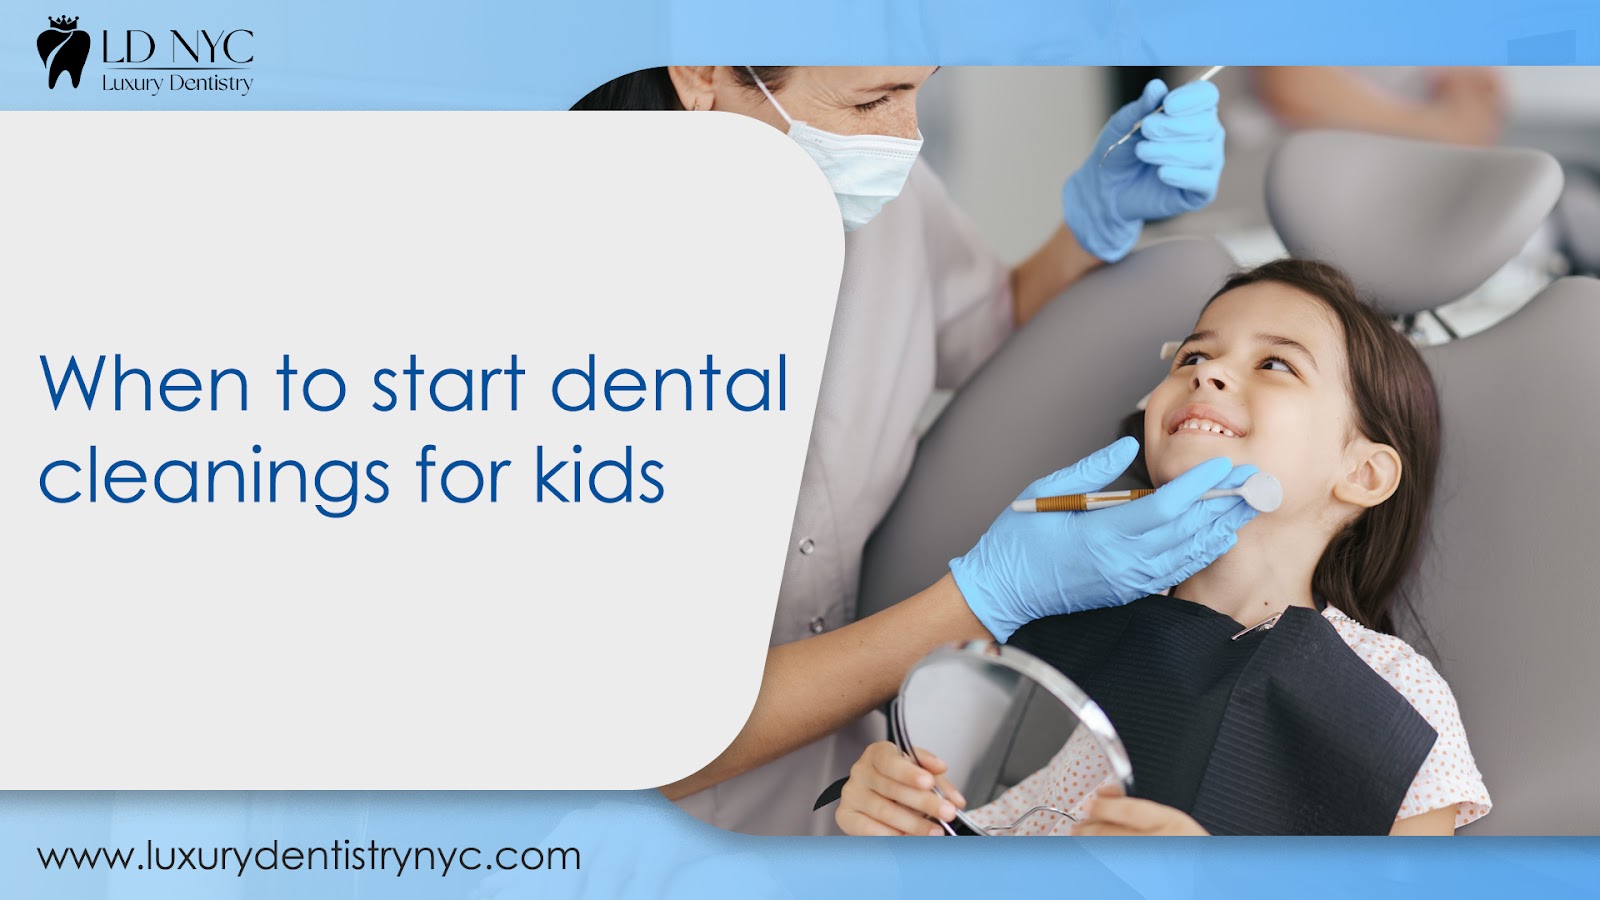 When to start dental cleanings for kids